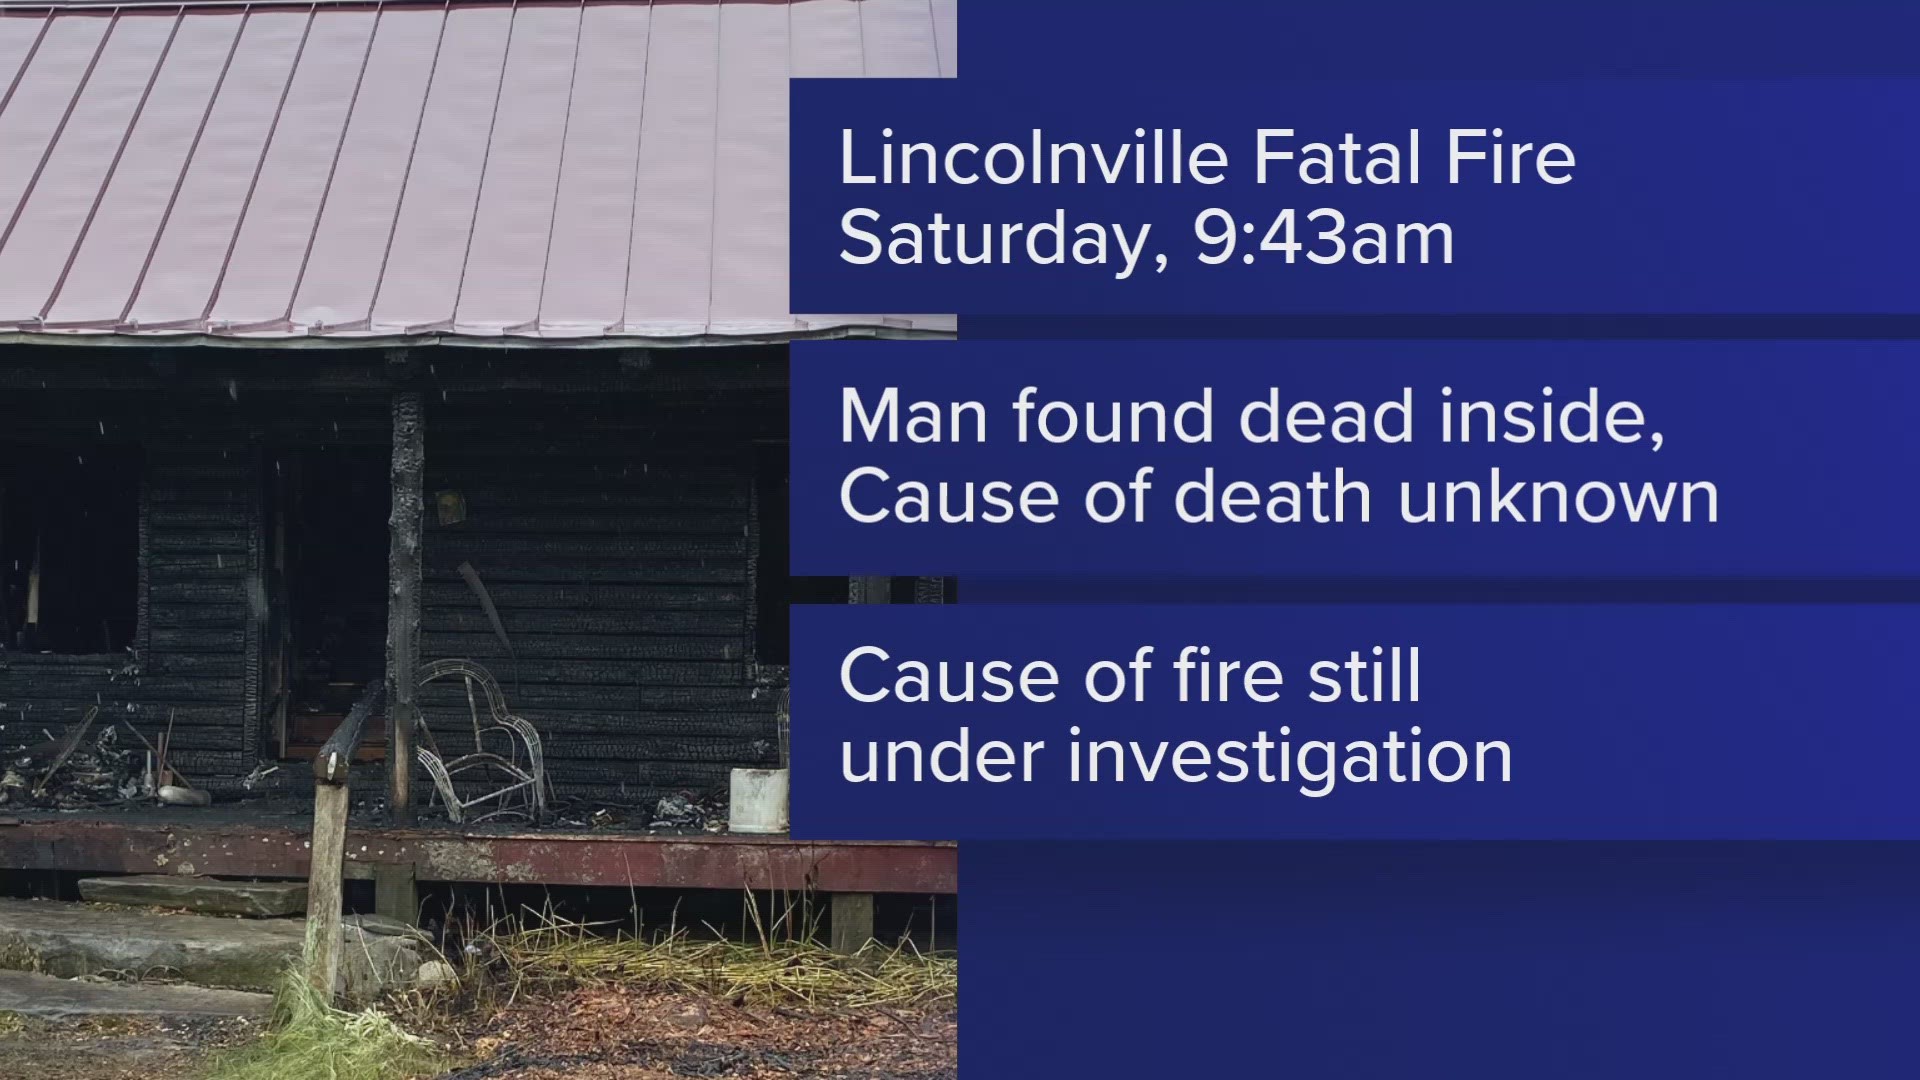 The Maine Department of Public Safety said the Lincolnville Fire Department responded to the fire on Miller Town Drive around 9:43 a.m. on Saturday, June 24.